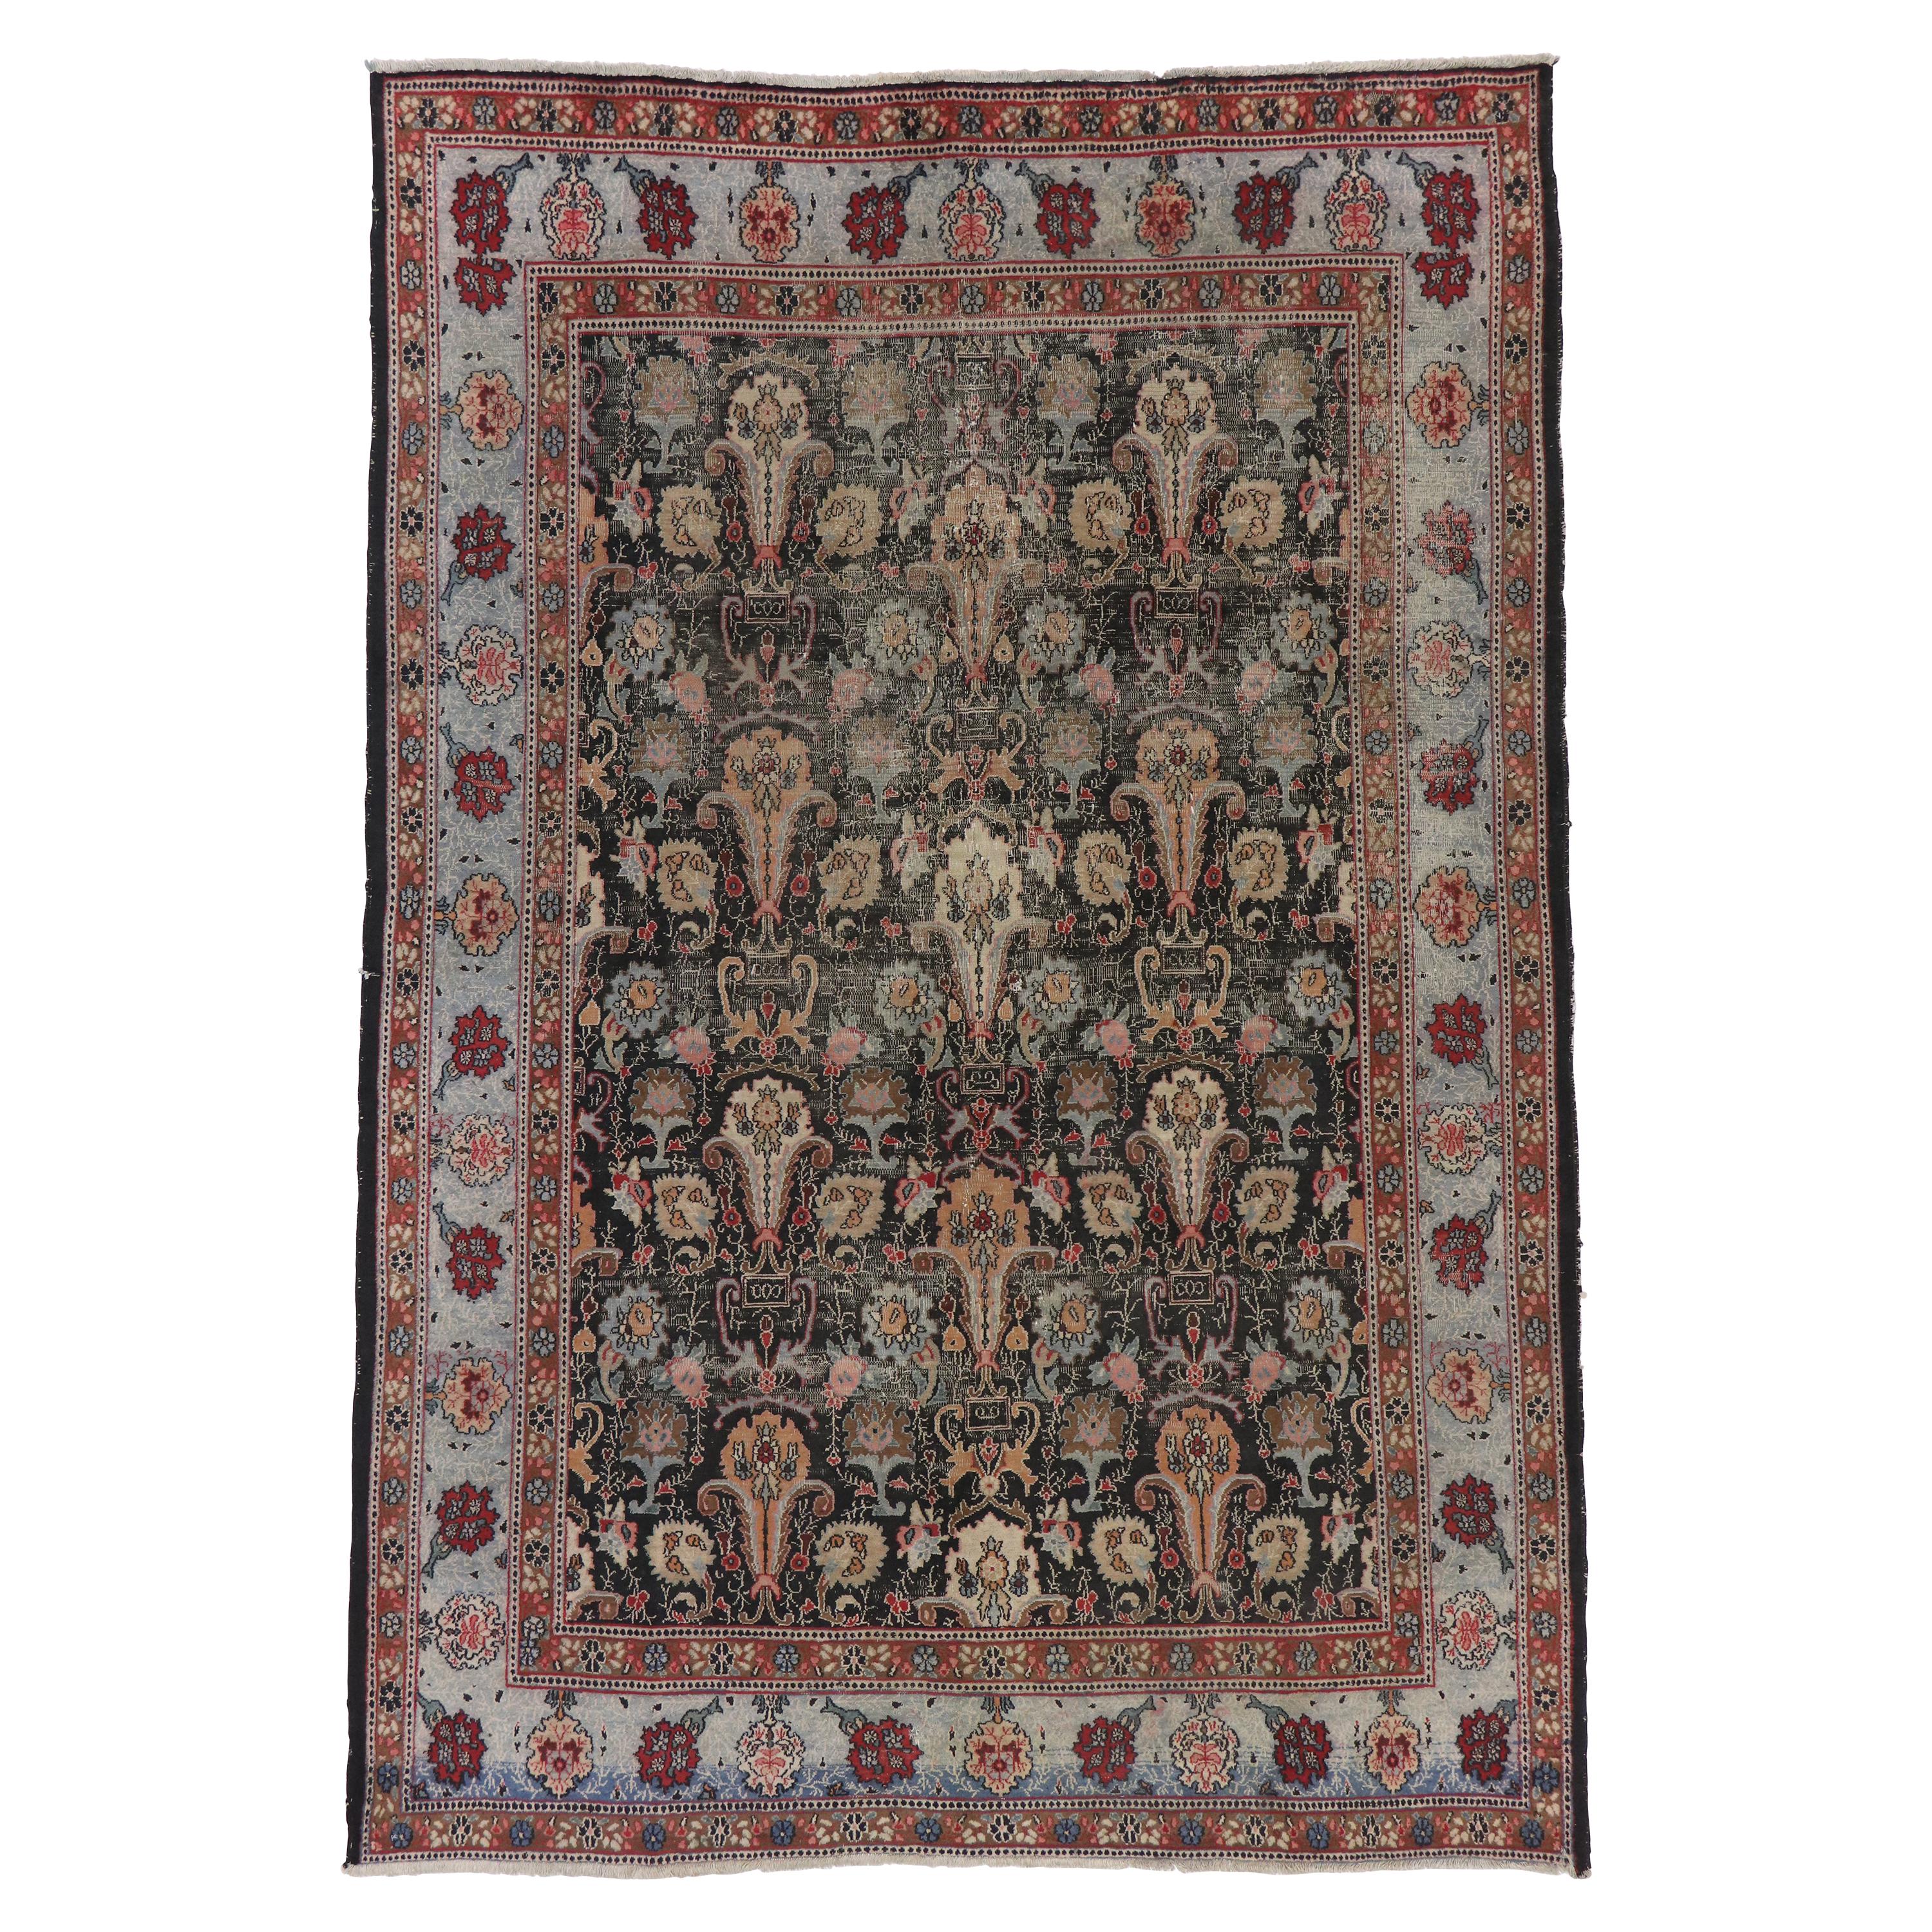 Distressed Antique Persian Khorassan Rug with Rustic American Colonial Style